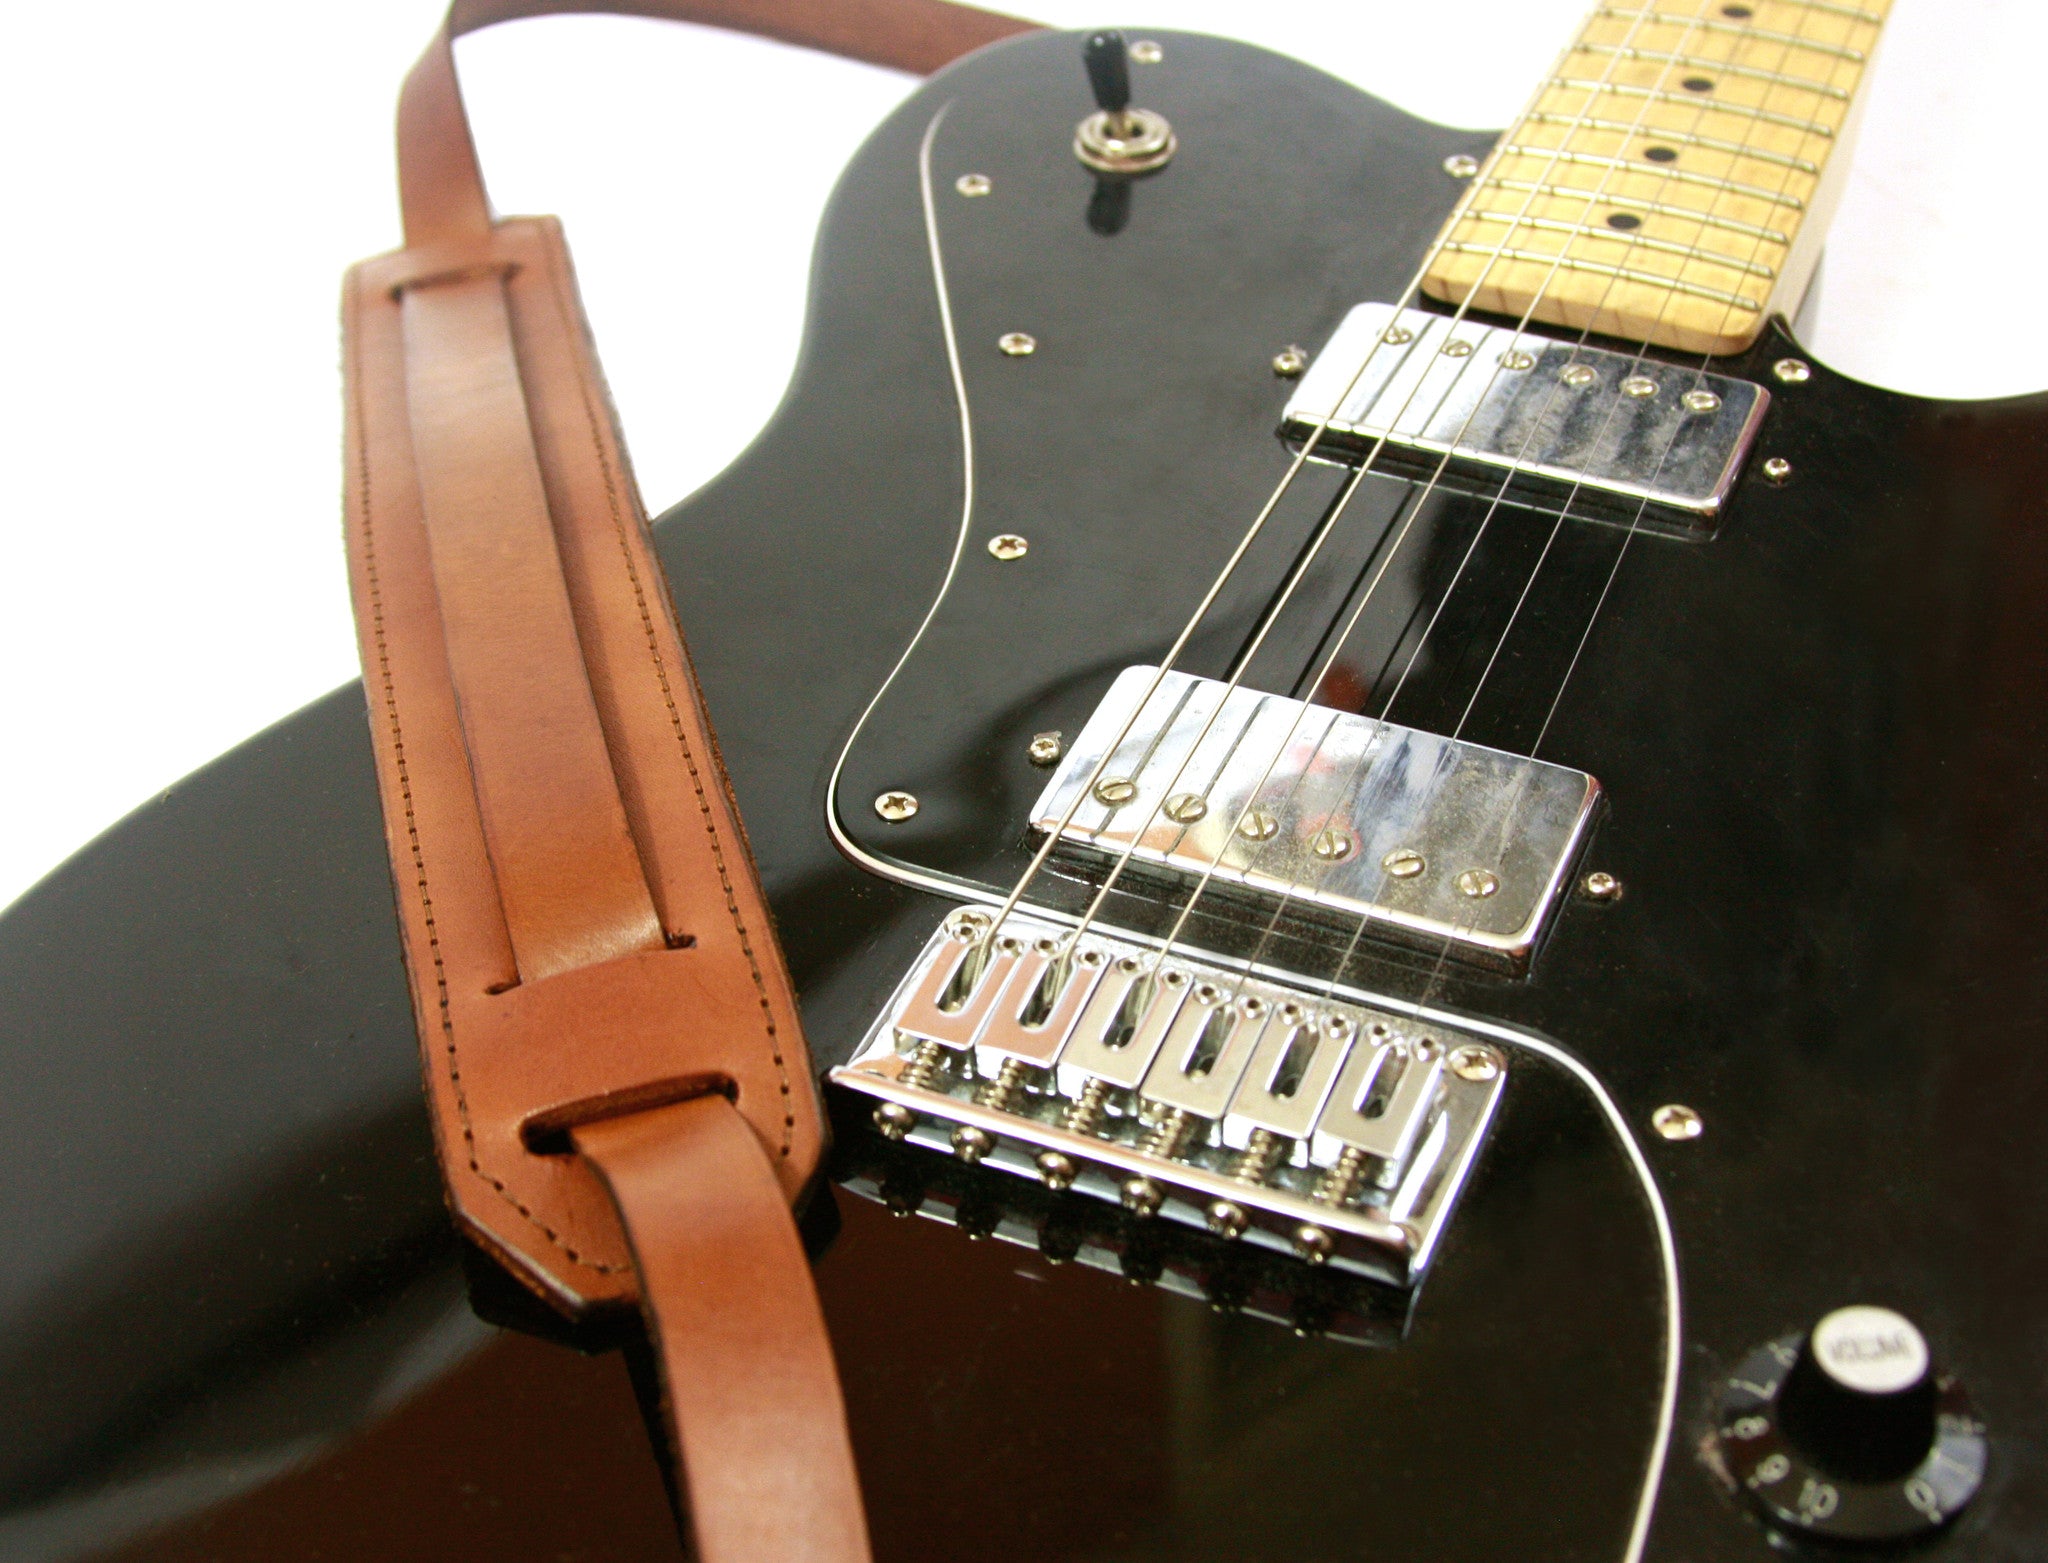 Old guitar strap, vintage guitar strap, classic guitar strap, leather guitar strap, leather strap, inspired by the early days of Rock ’n’ Roll, this classic style of leather guitar strap was worn by the likes of Chuck Berry, Elvis Presley, and The Beatles. It’s still used today by many of our favorite musicians on both acoustic and electric guitars.